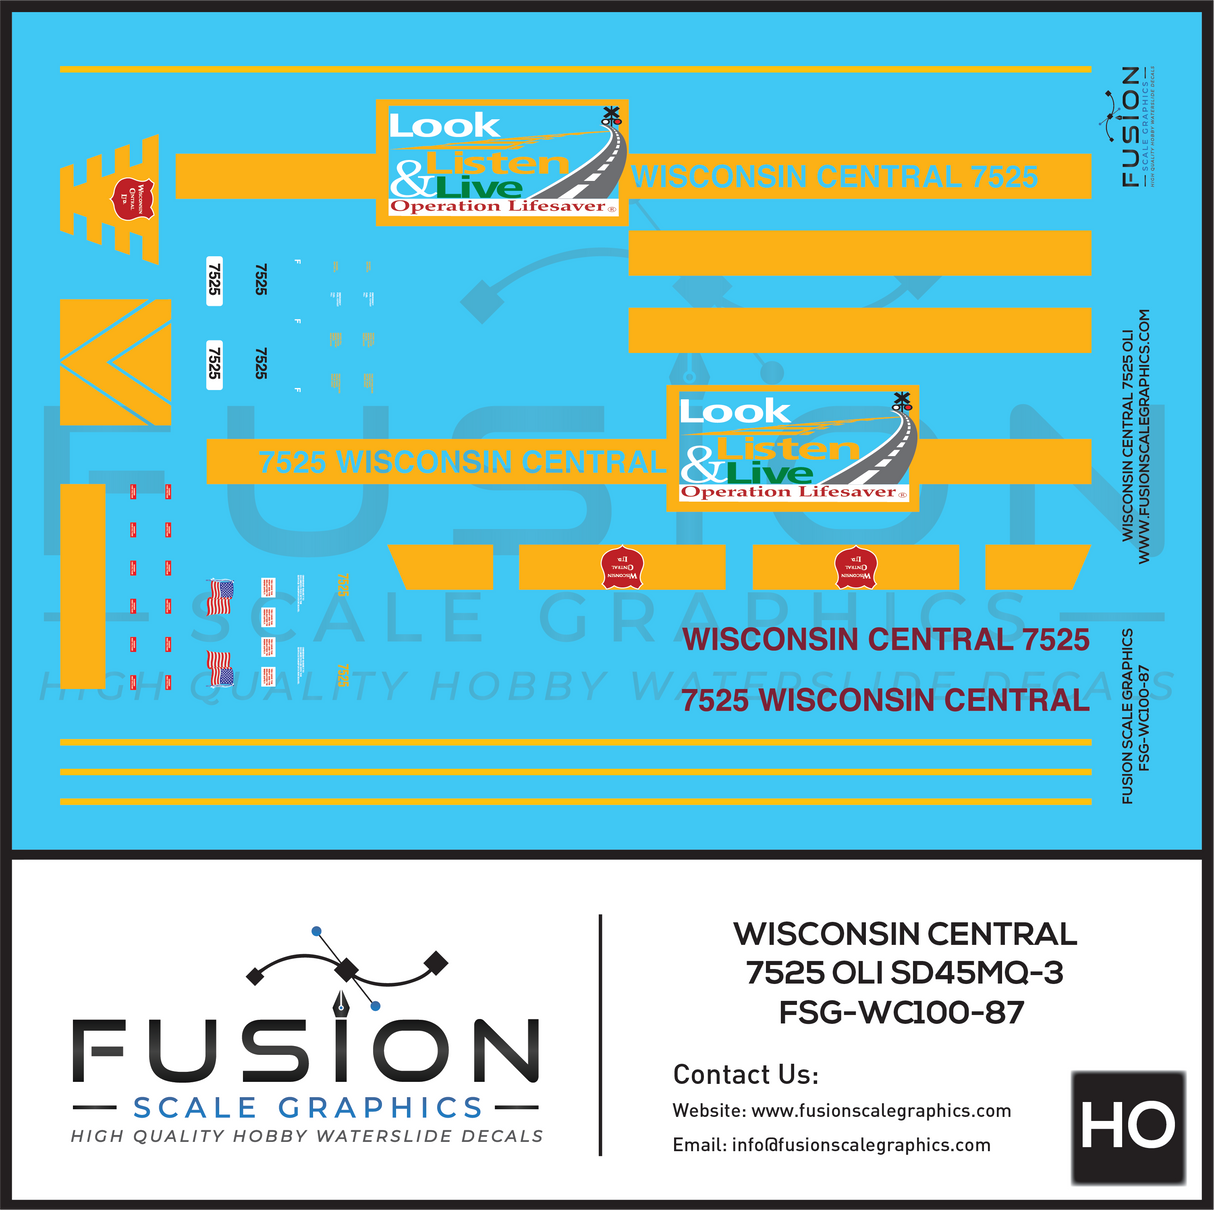 HO Scale Wisconsin Central 7525 OLS SD45MQ-3 Locomotive Decal Set